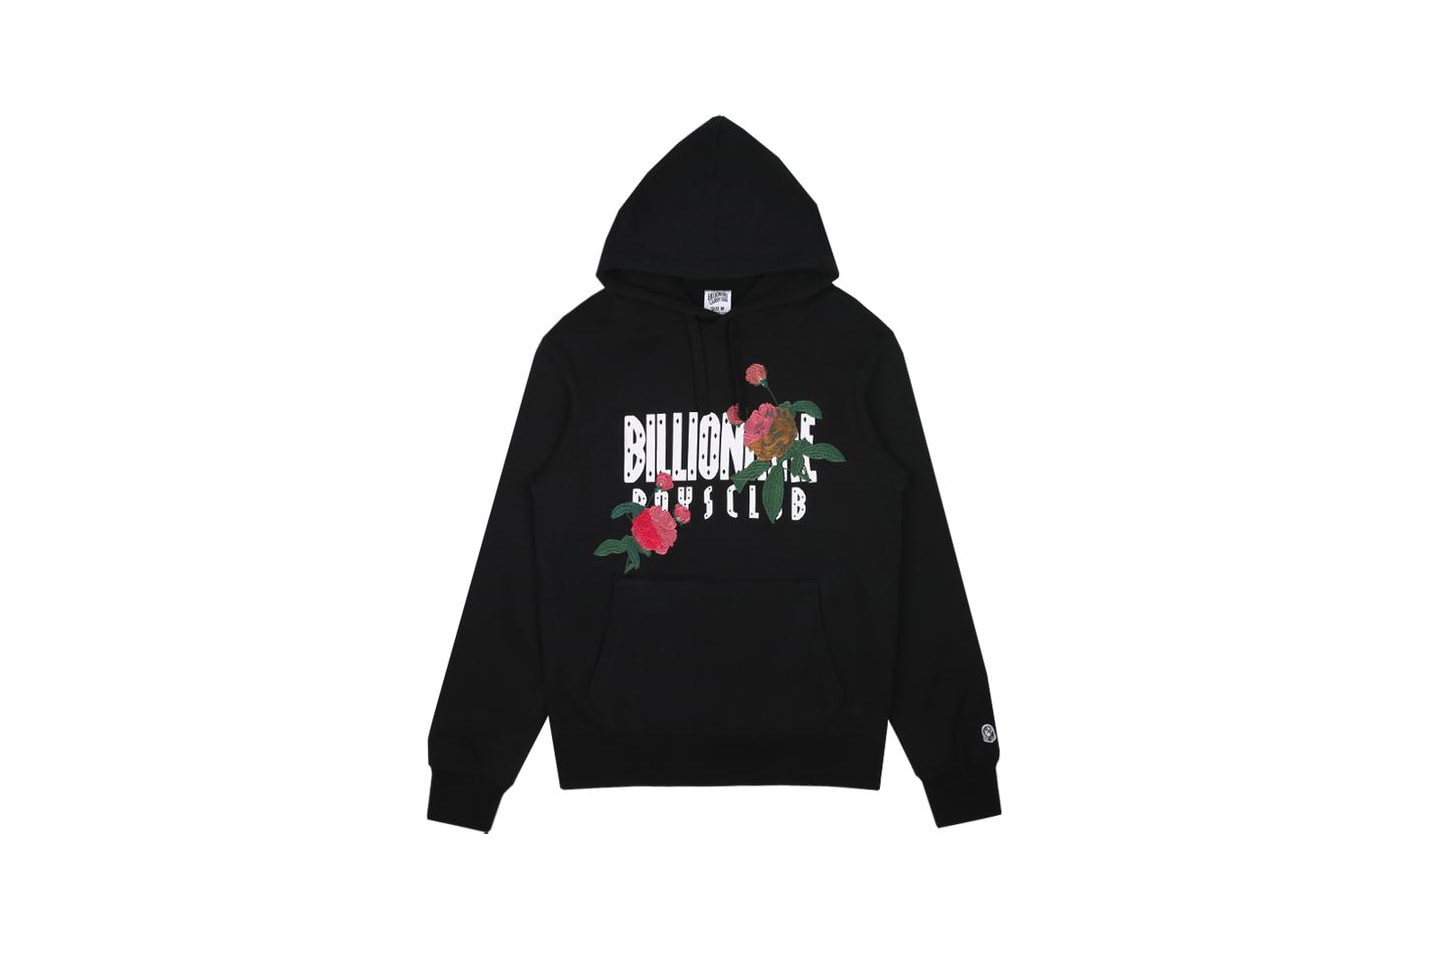 Billionaire Boys Club Spring 2018 Embroidered Floral Hoodie Black